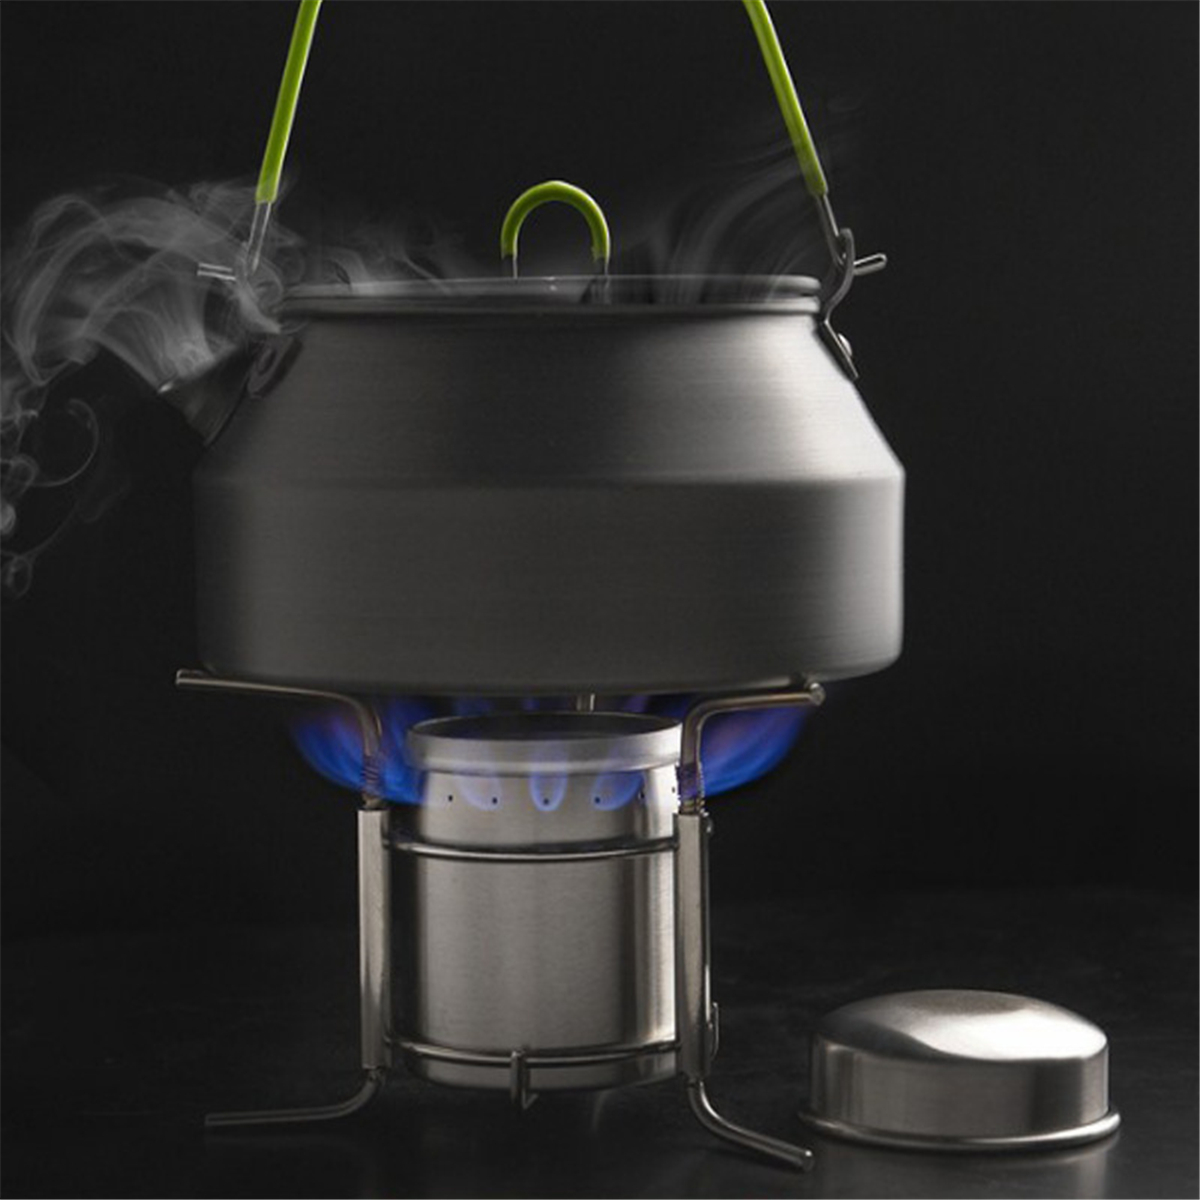 Portable-Outdoor-Alcohol-Stove-Camping-Picnic-BBQ-Cooking-Stove-Stainless-Steel-Cooker-1397341